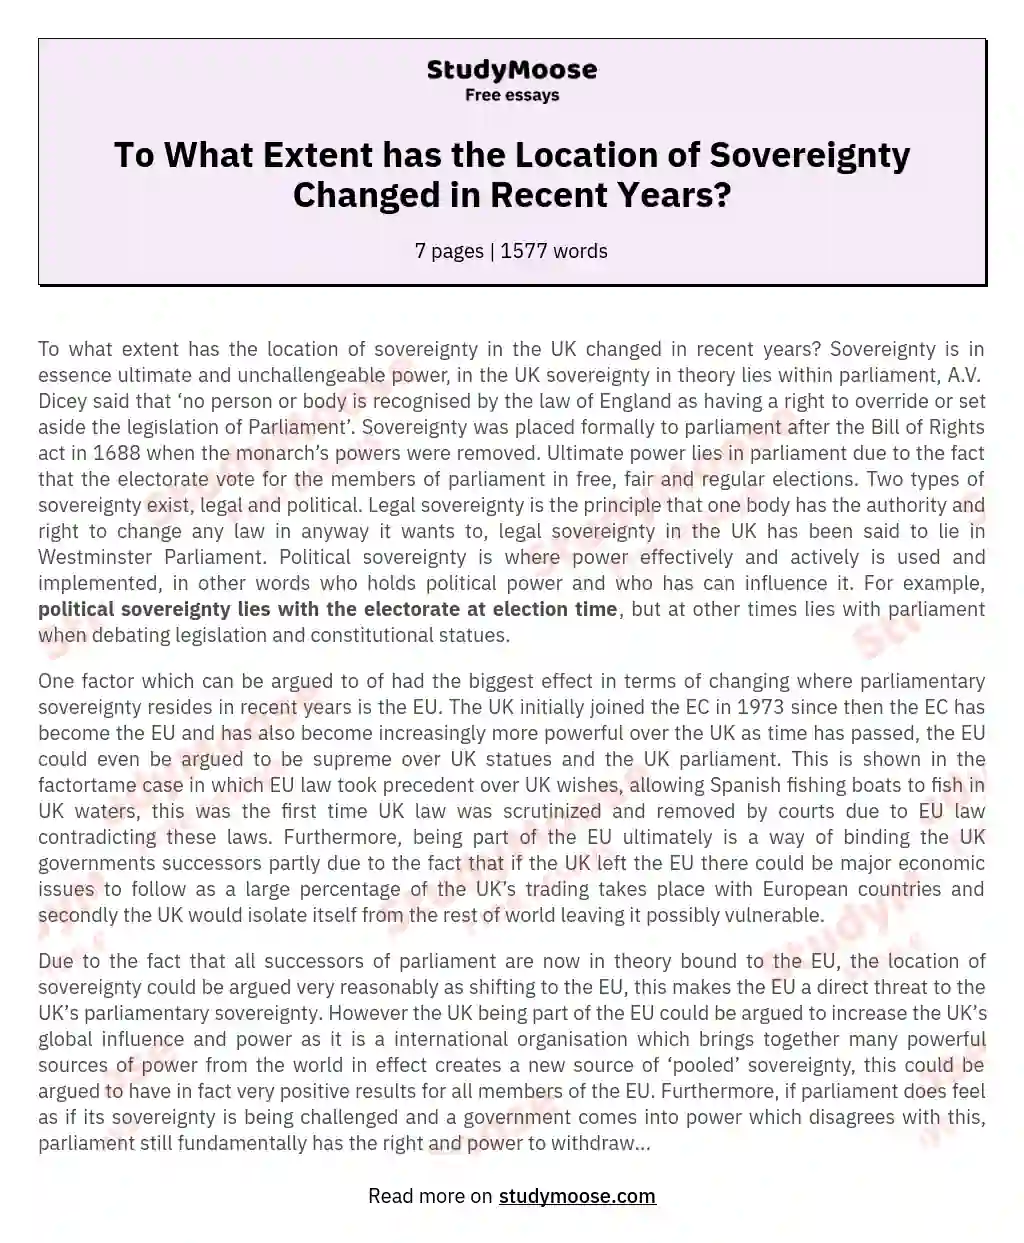 To What Extent has the Location of Sovereignty Changed in Recent Years? essay